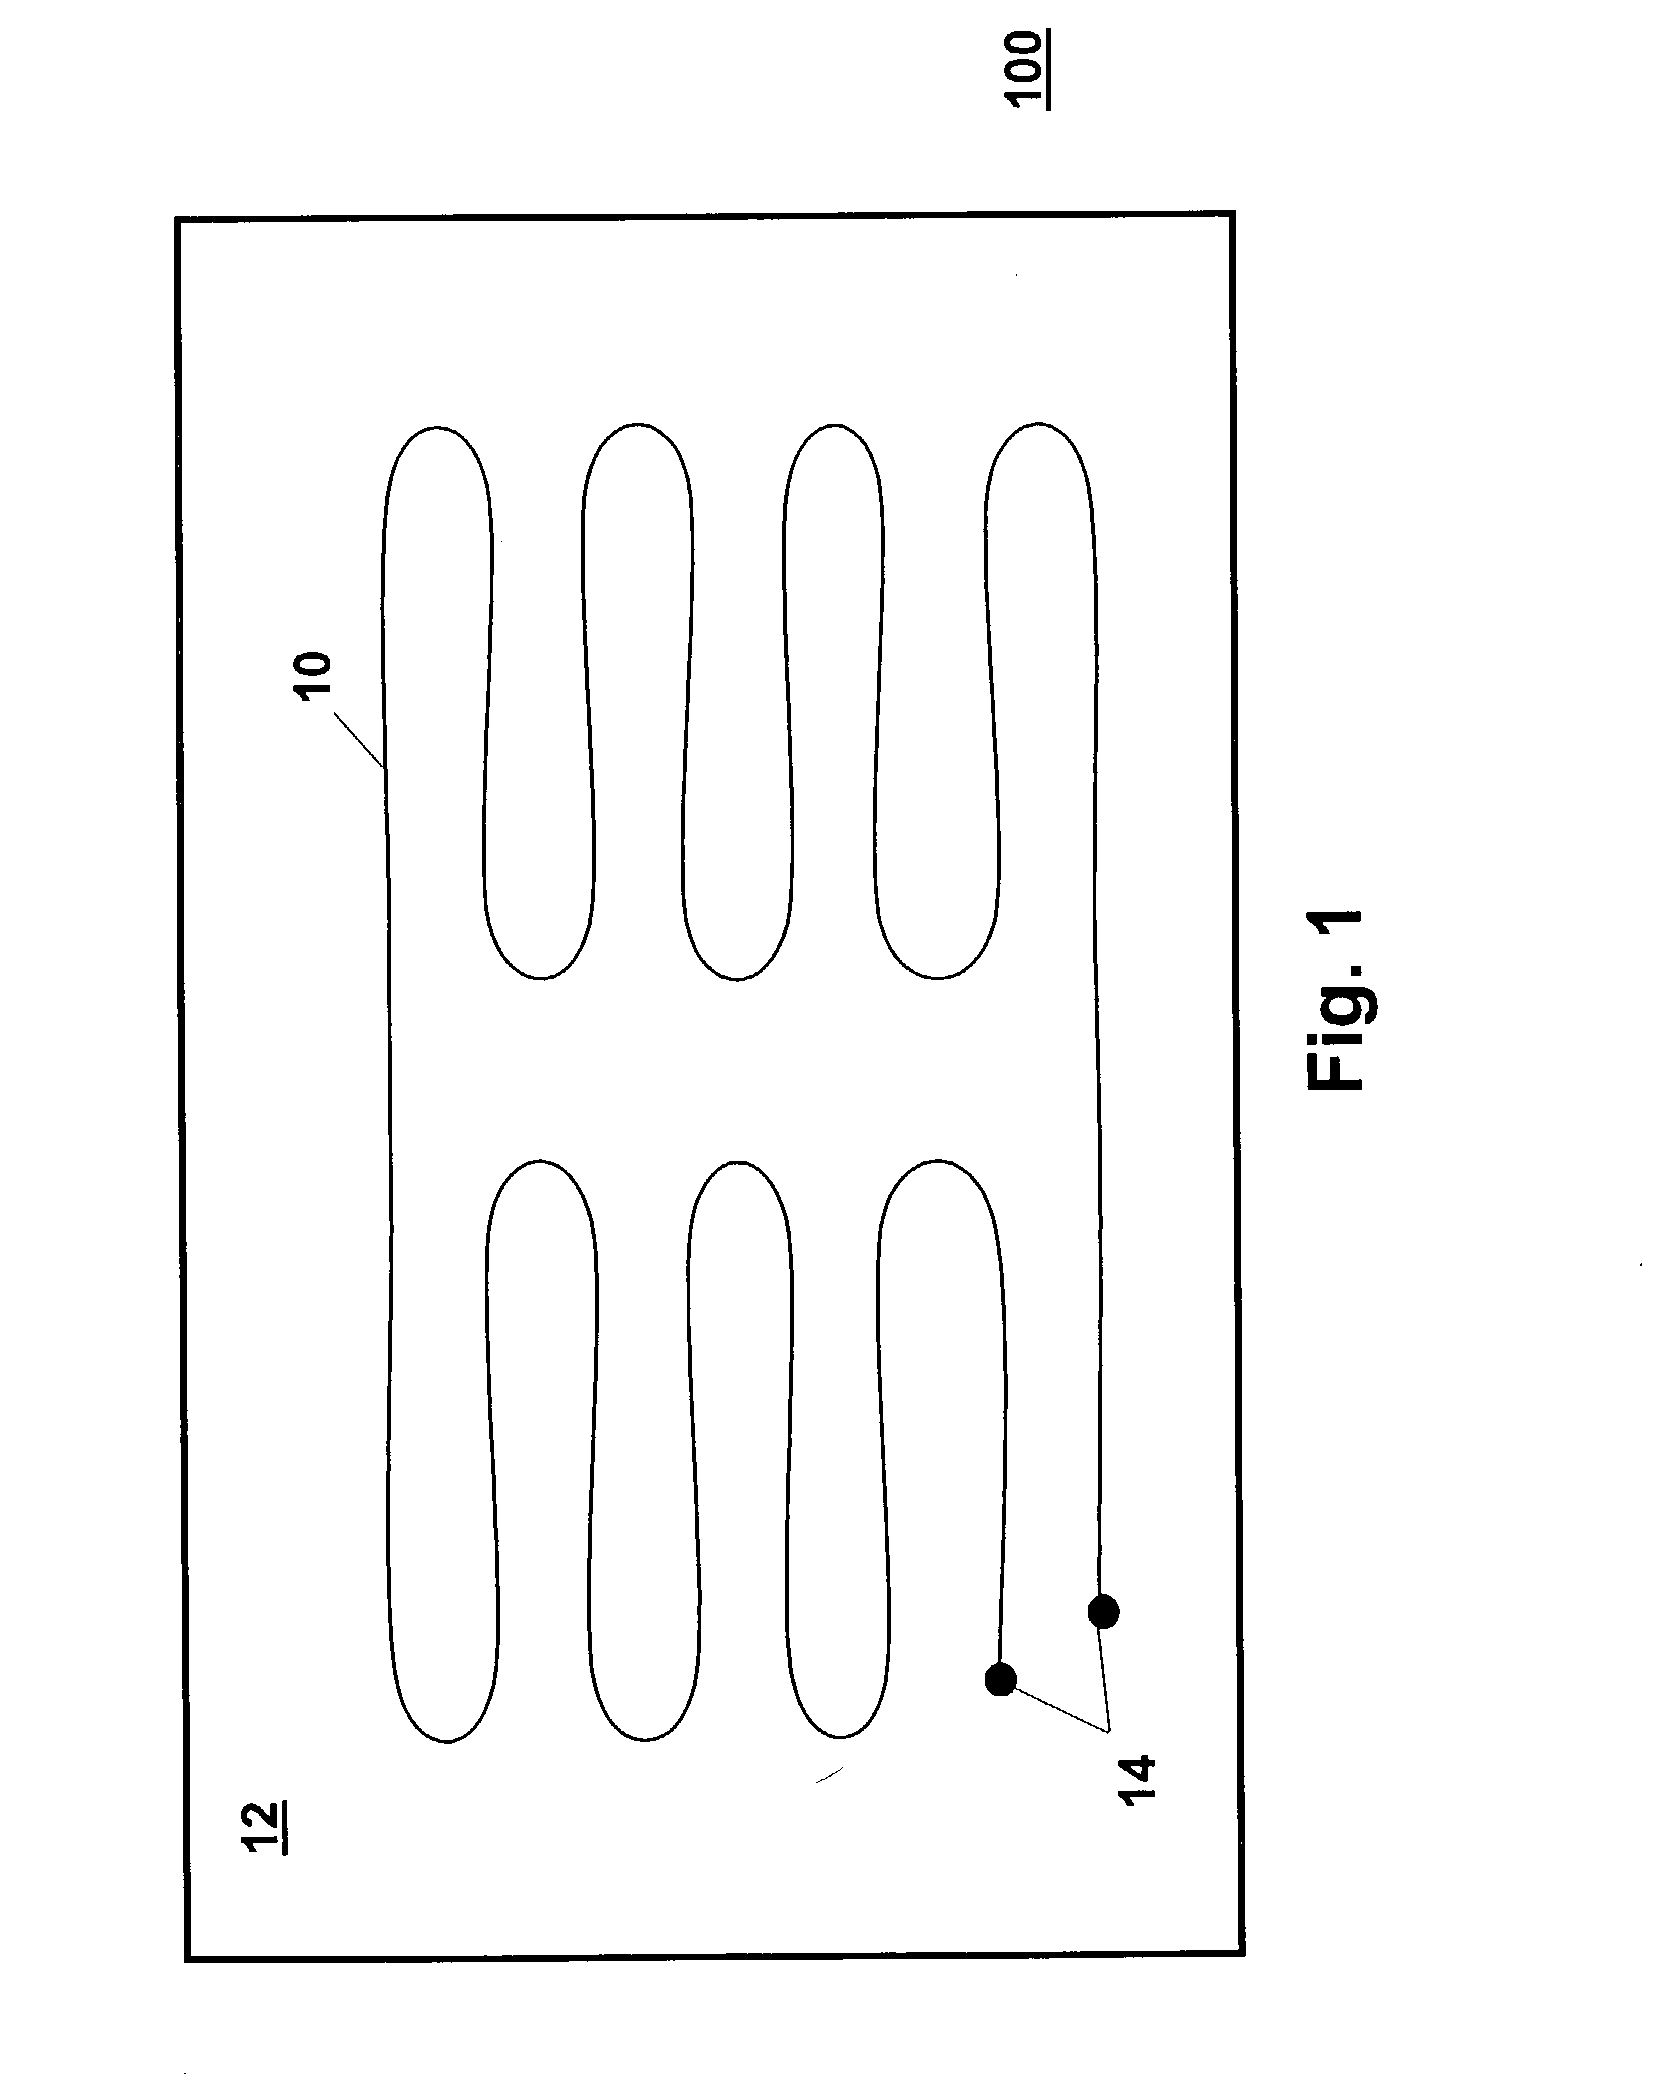 Polymer-encapsulated heating elements for controlling the temperature of an aircraft compartment